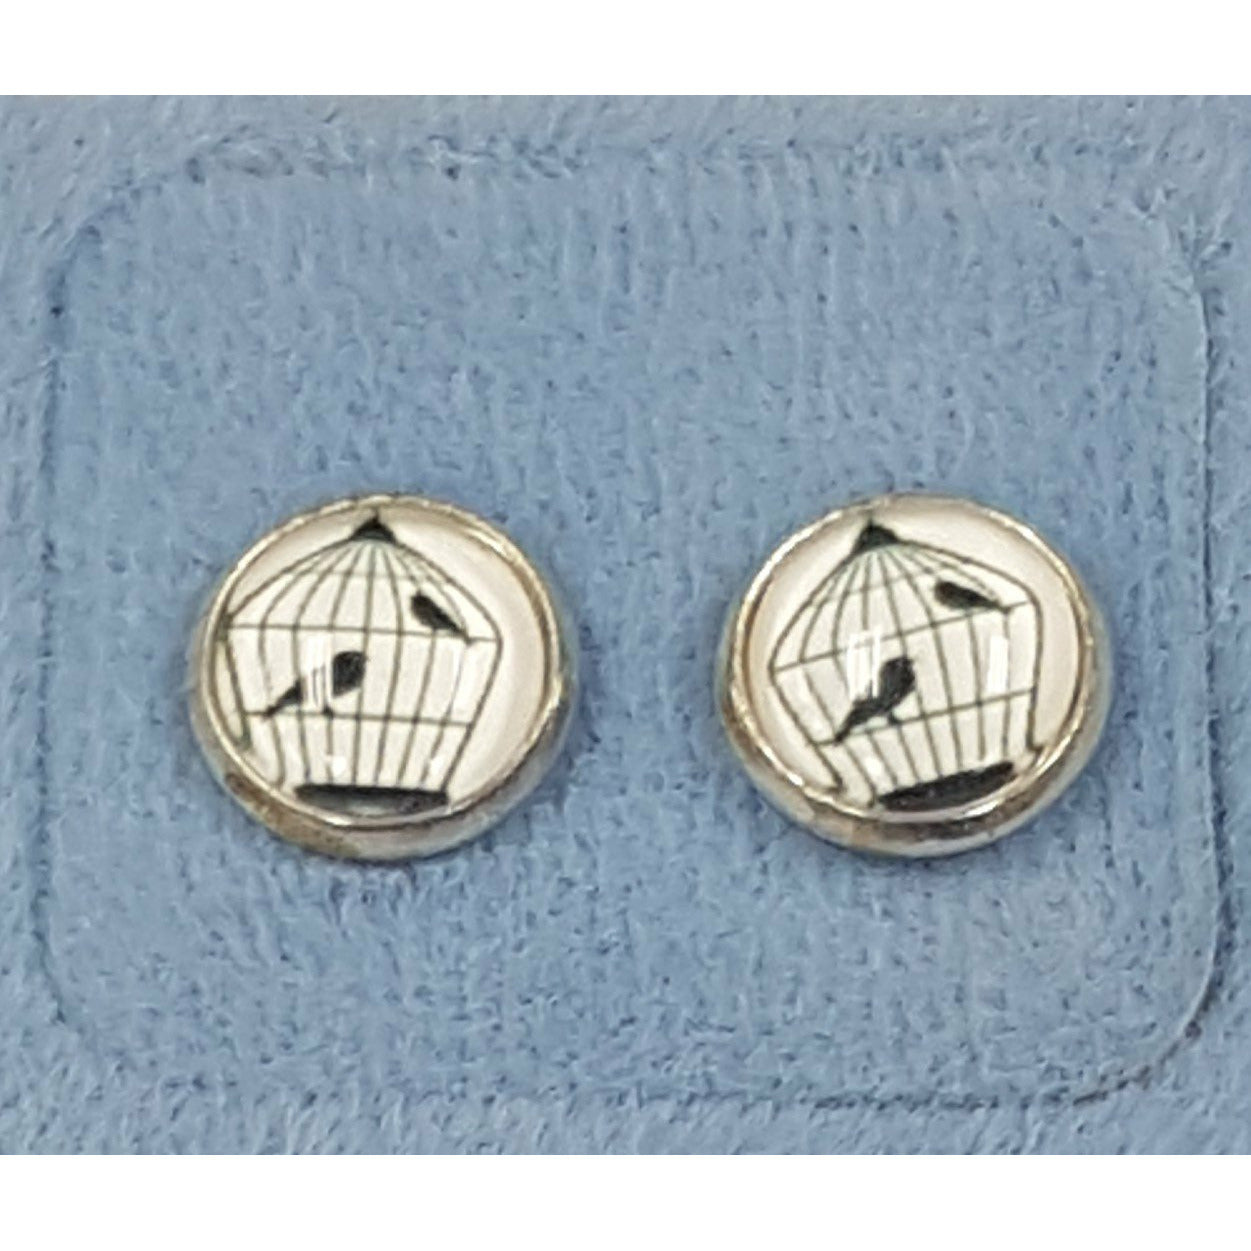 Glass Dome Earring - Black & White Bird in Cage Not specified